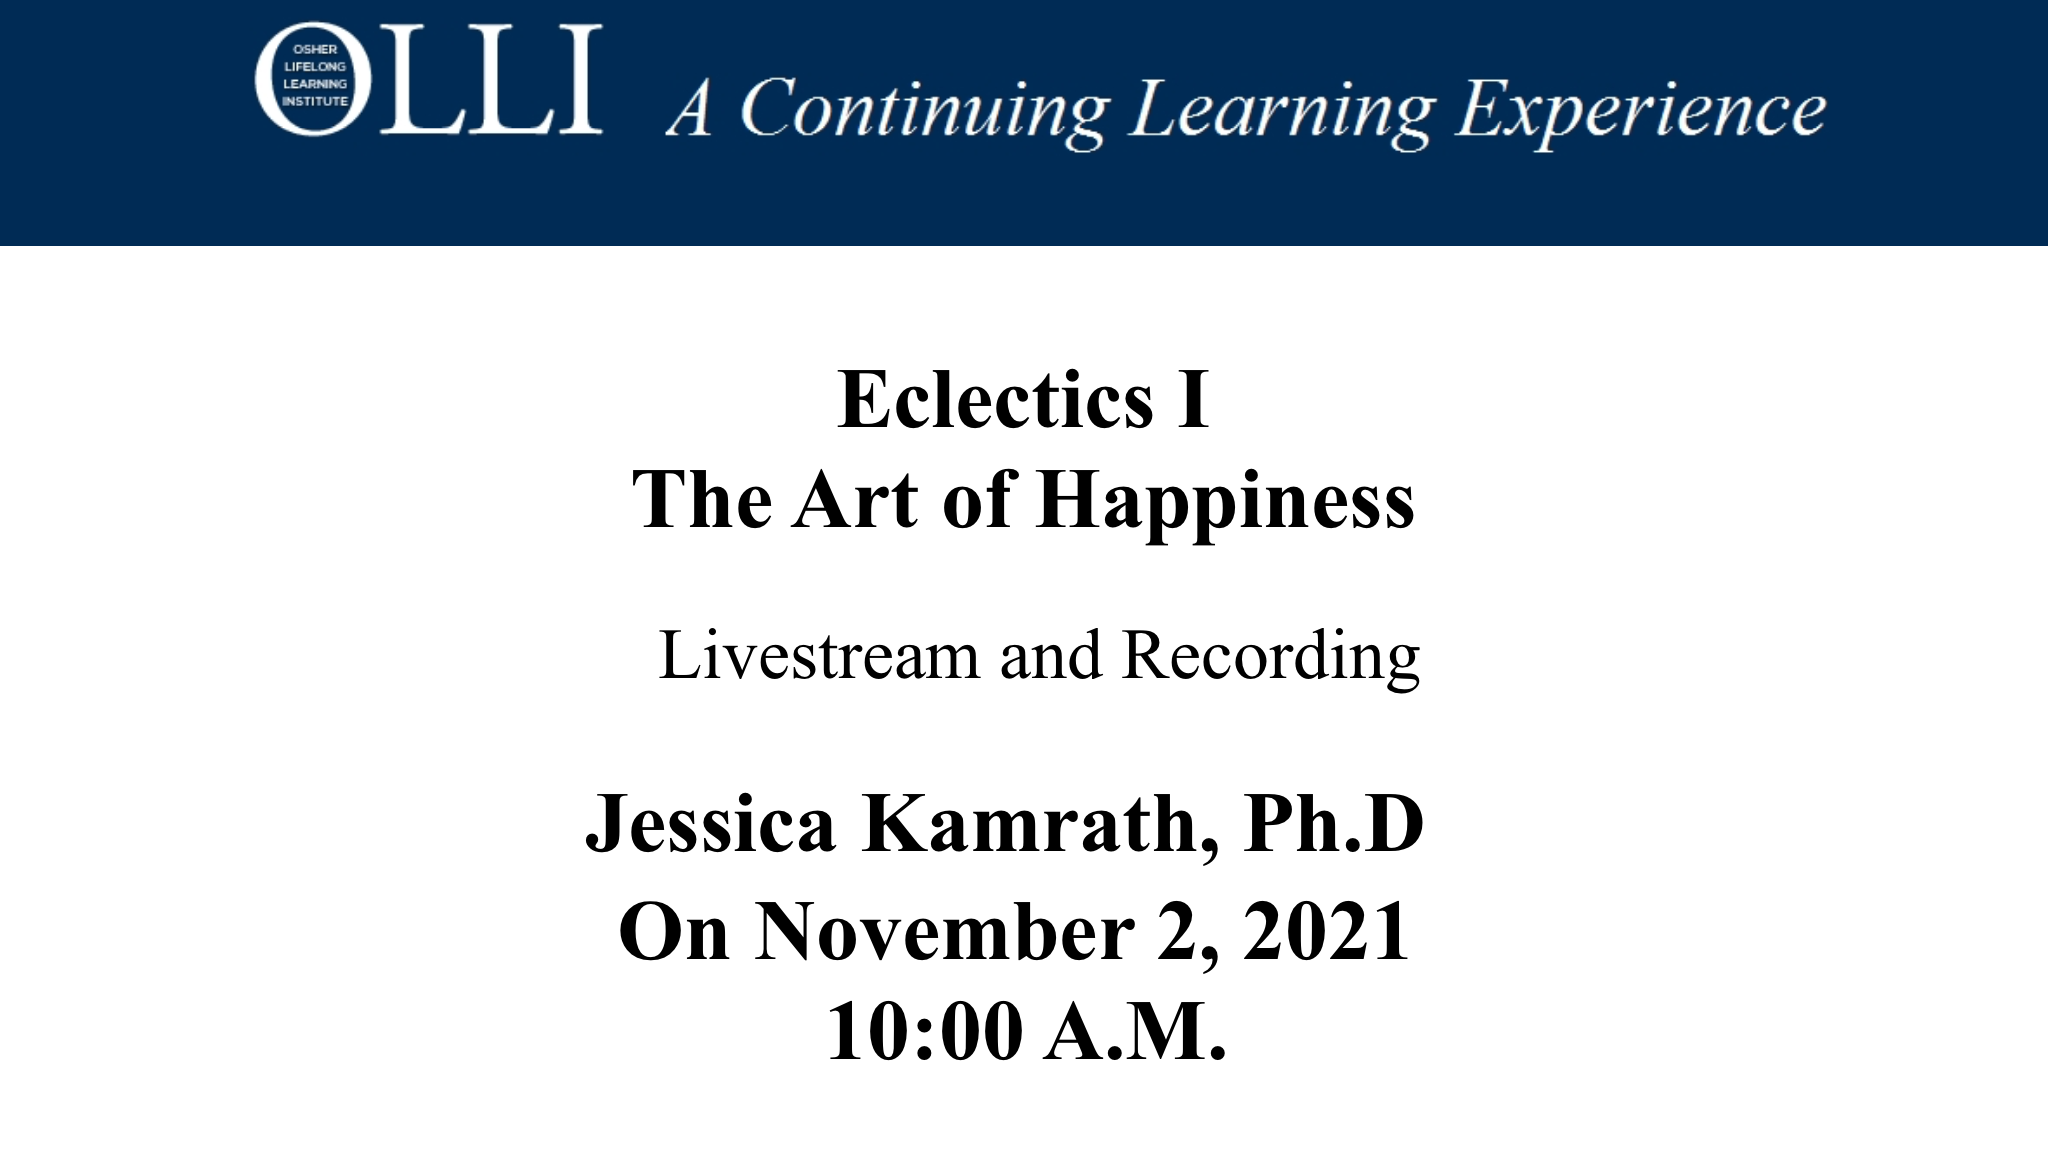 Click here to view the livestream of Eclectics I - The Art of Hapiness